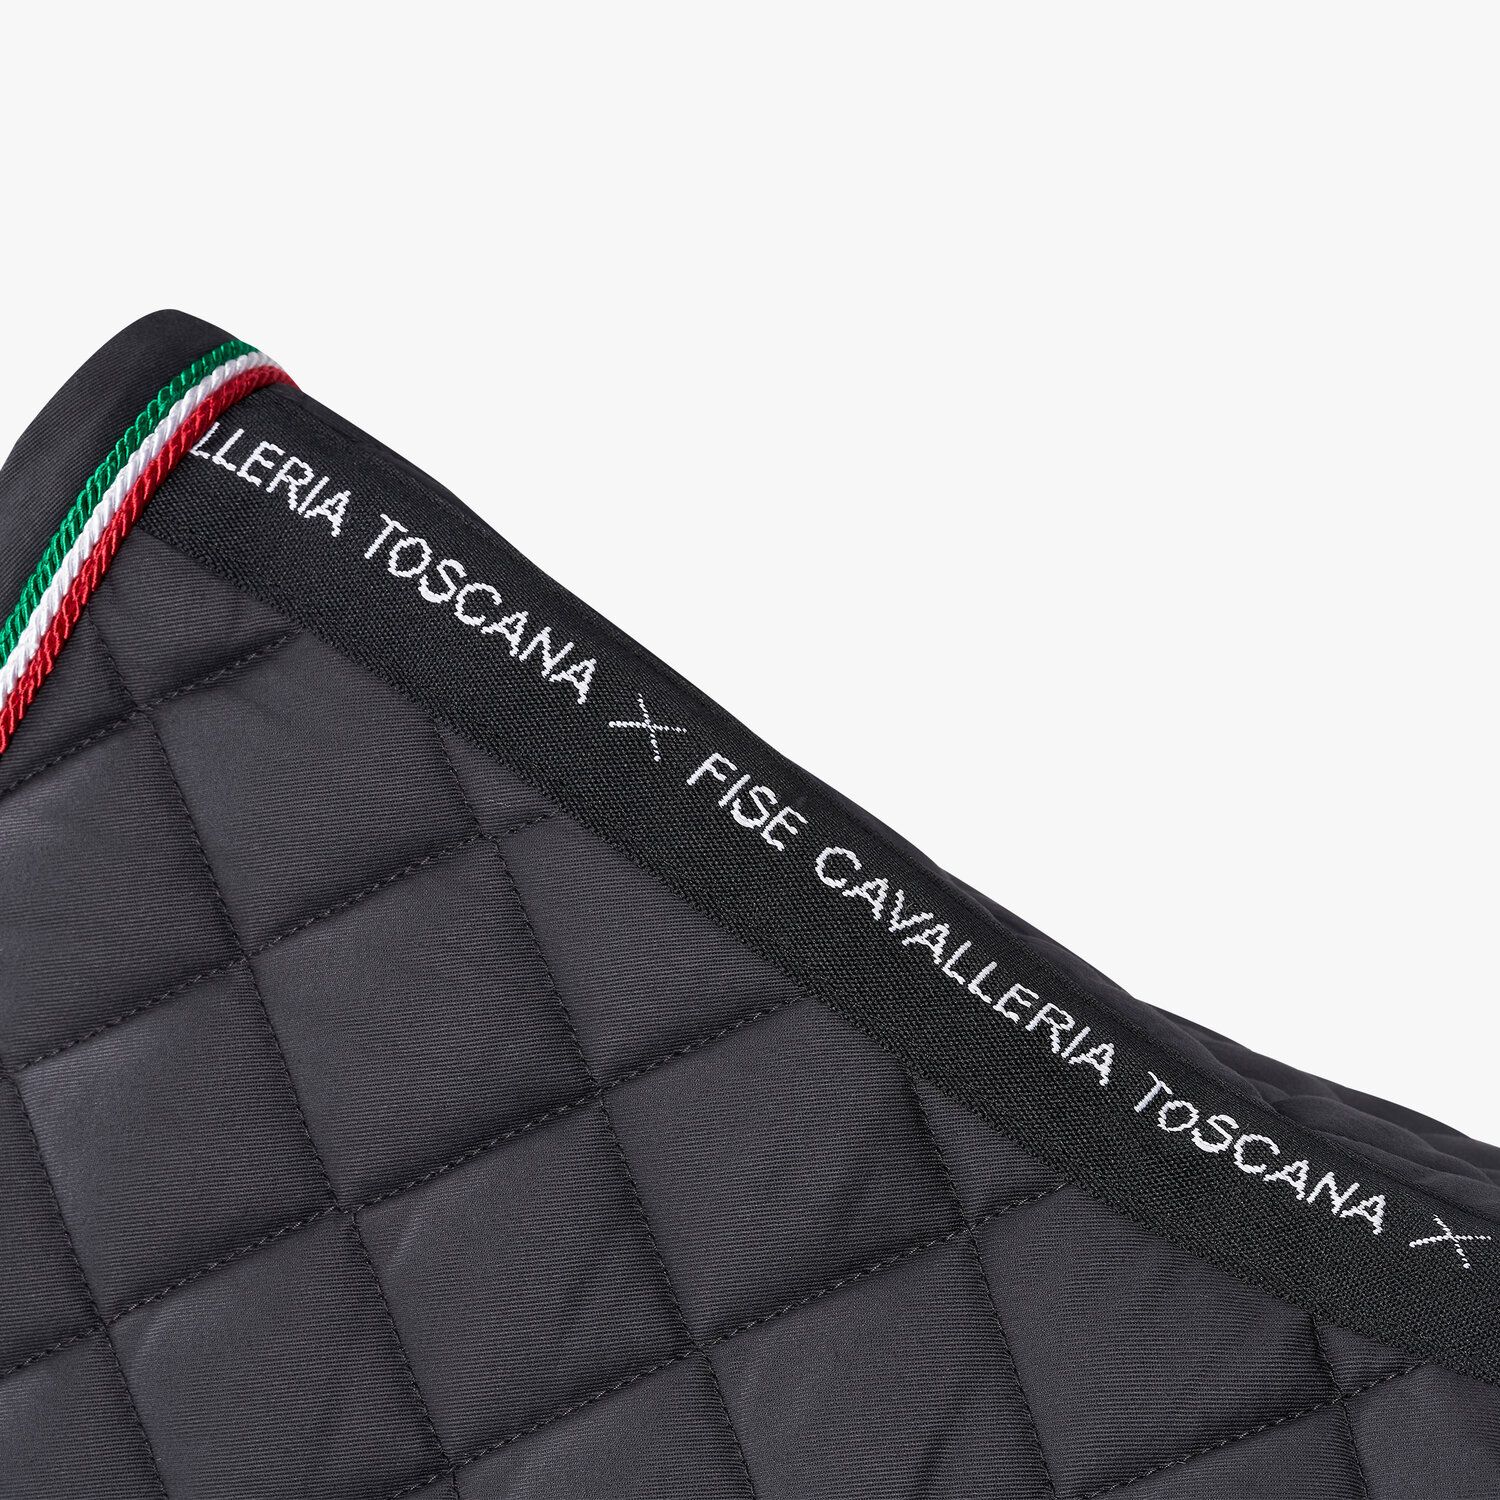 Cavalleria Toscana FISE jumping saddle pad with Italian flag piping GREY-2